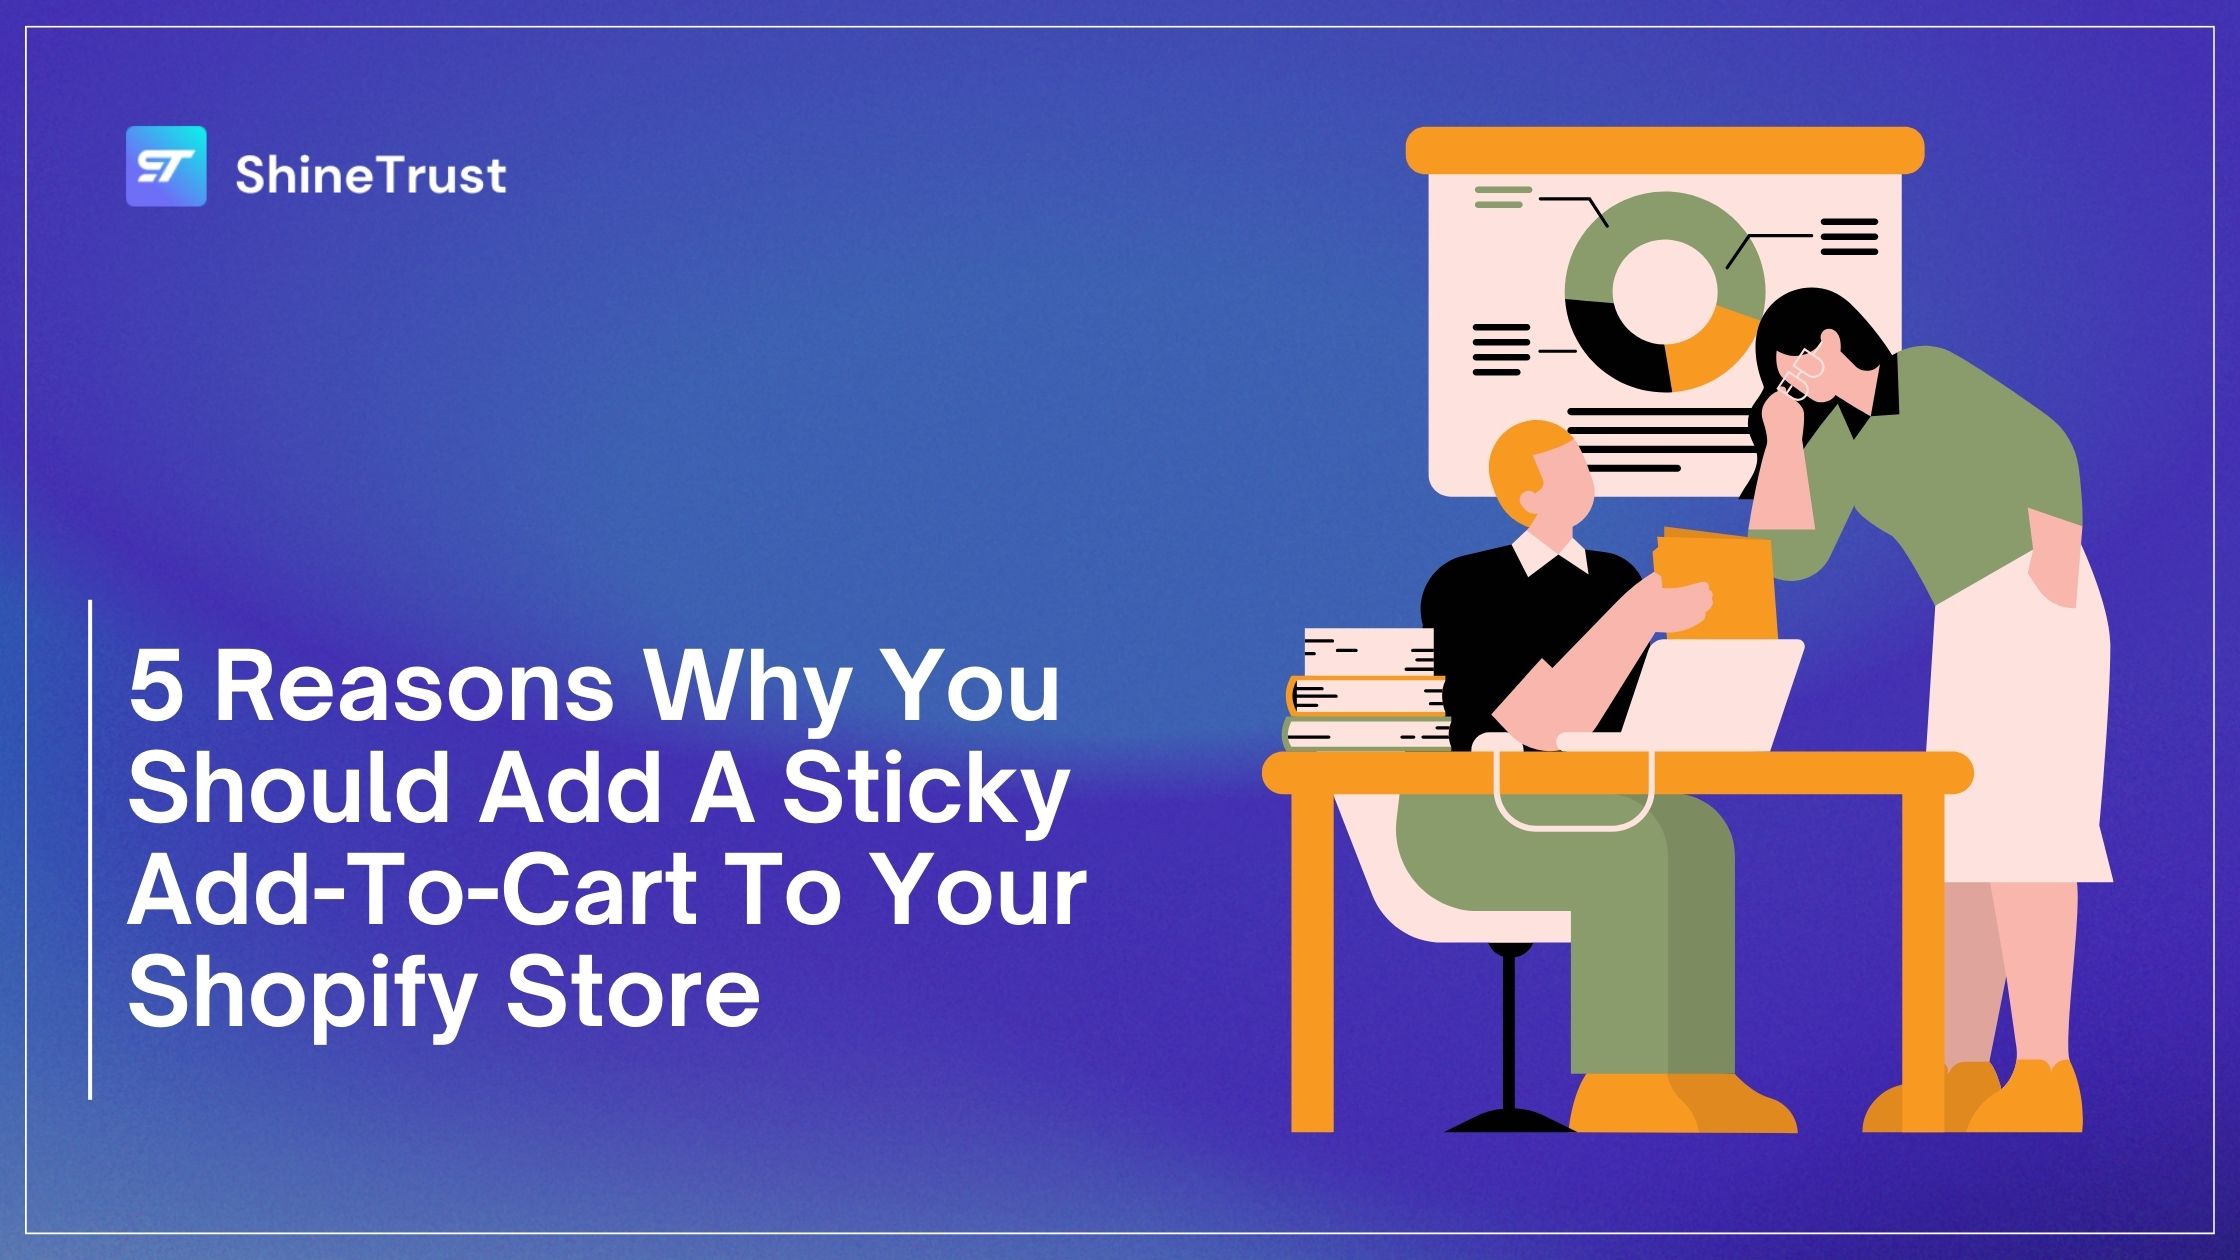 5 Reasons Why You Should Add A Sticky Add-To-Cart To Your Shopify Store